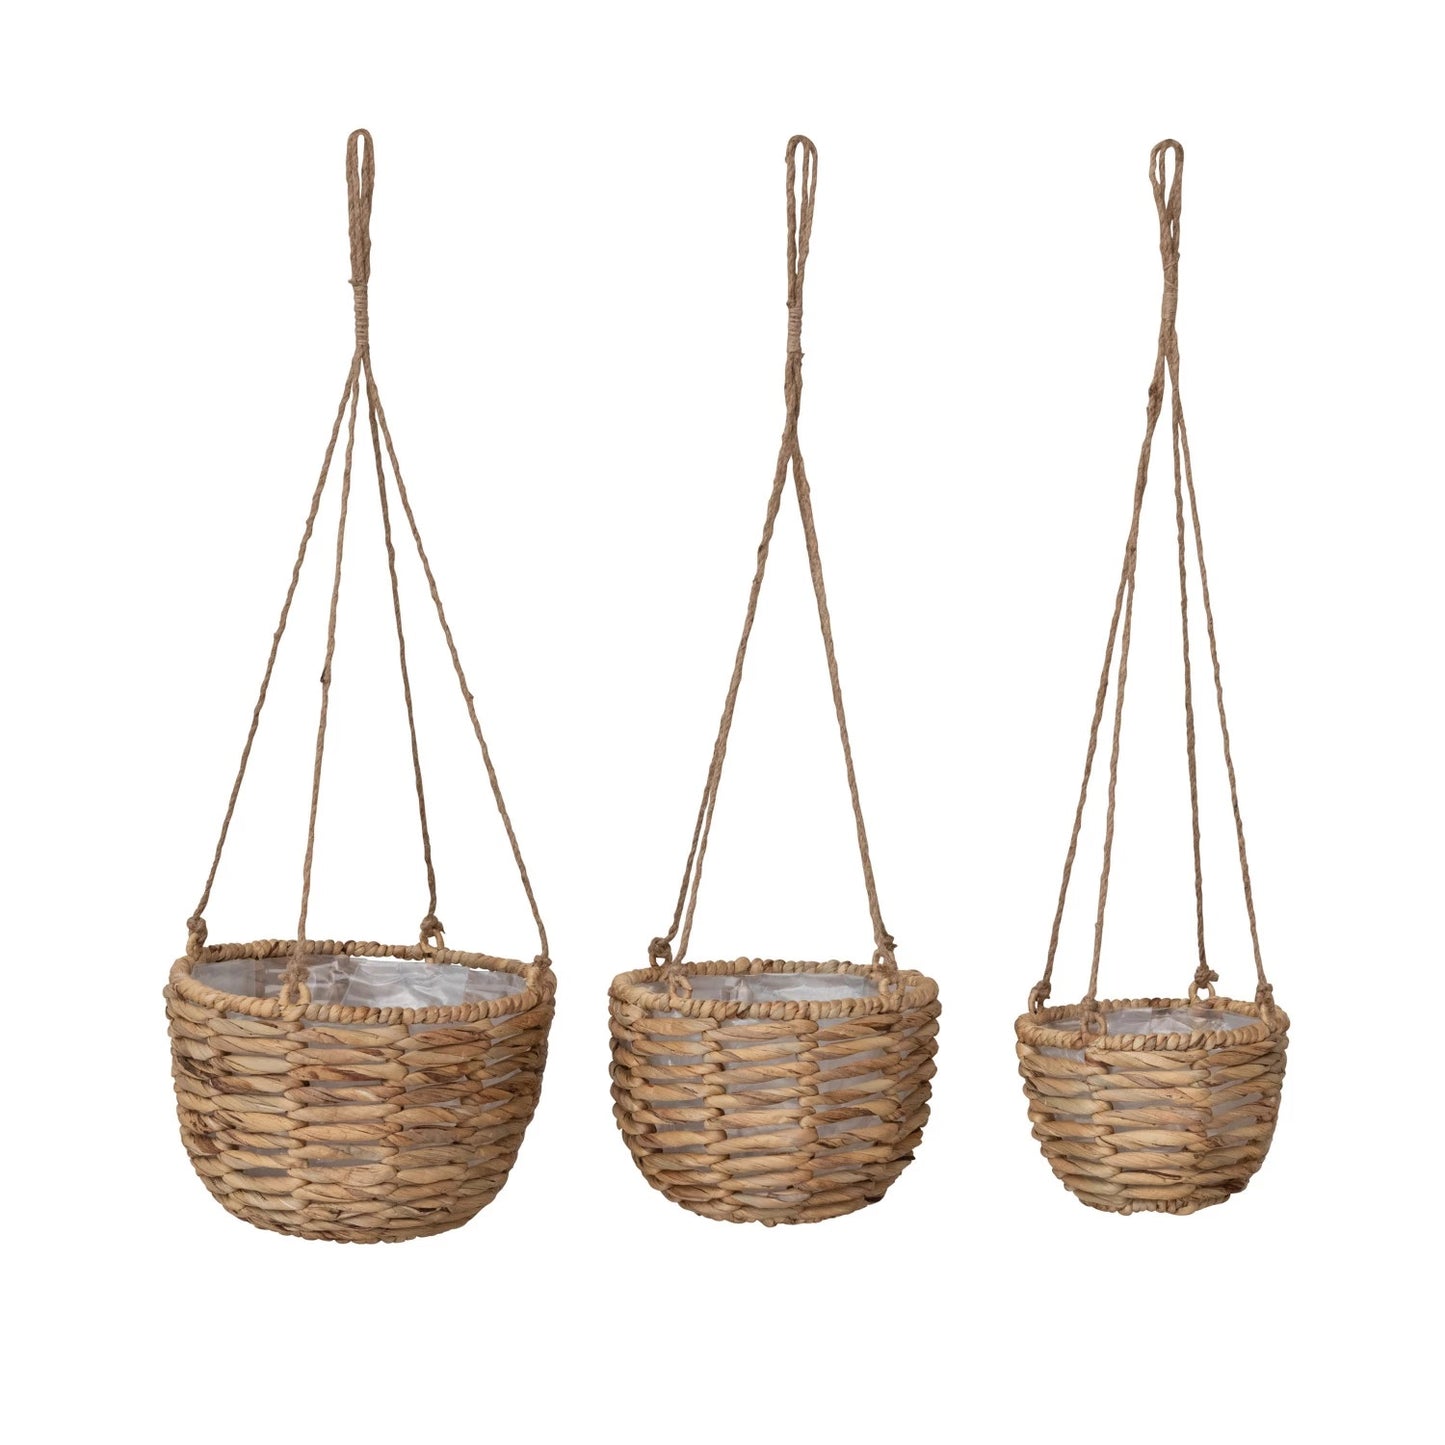 Hanging Water Hyacinth Planters with Plastic Liners and Jute Rope Hangers